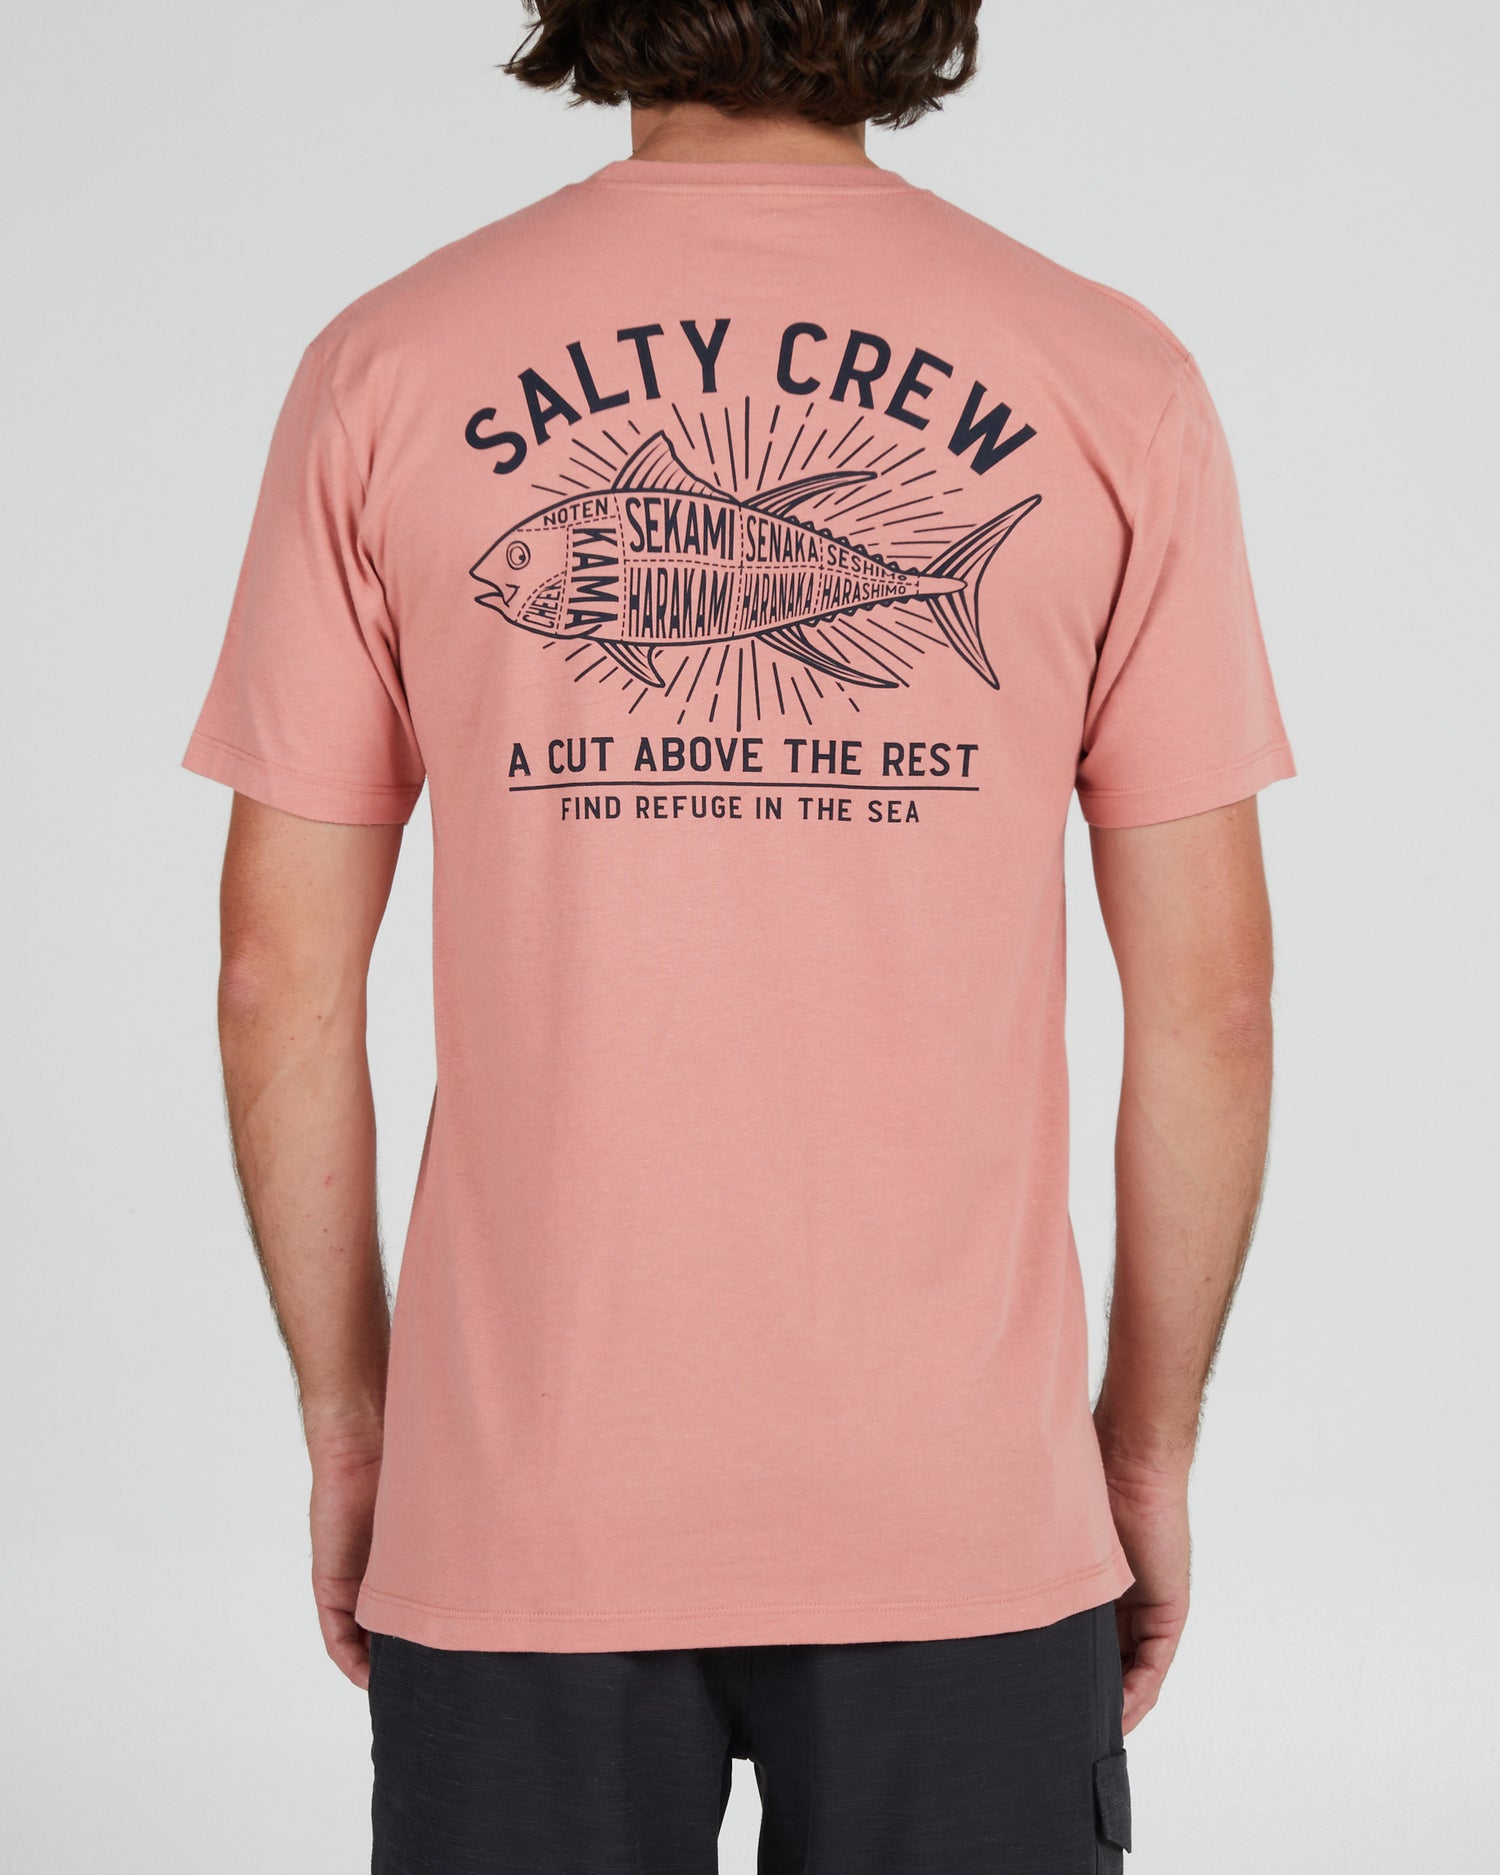 On body back of the Cut Above Coral S/S Premium Tee